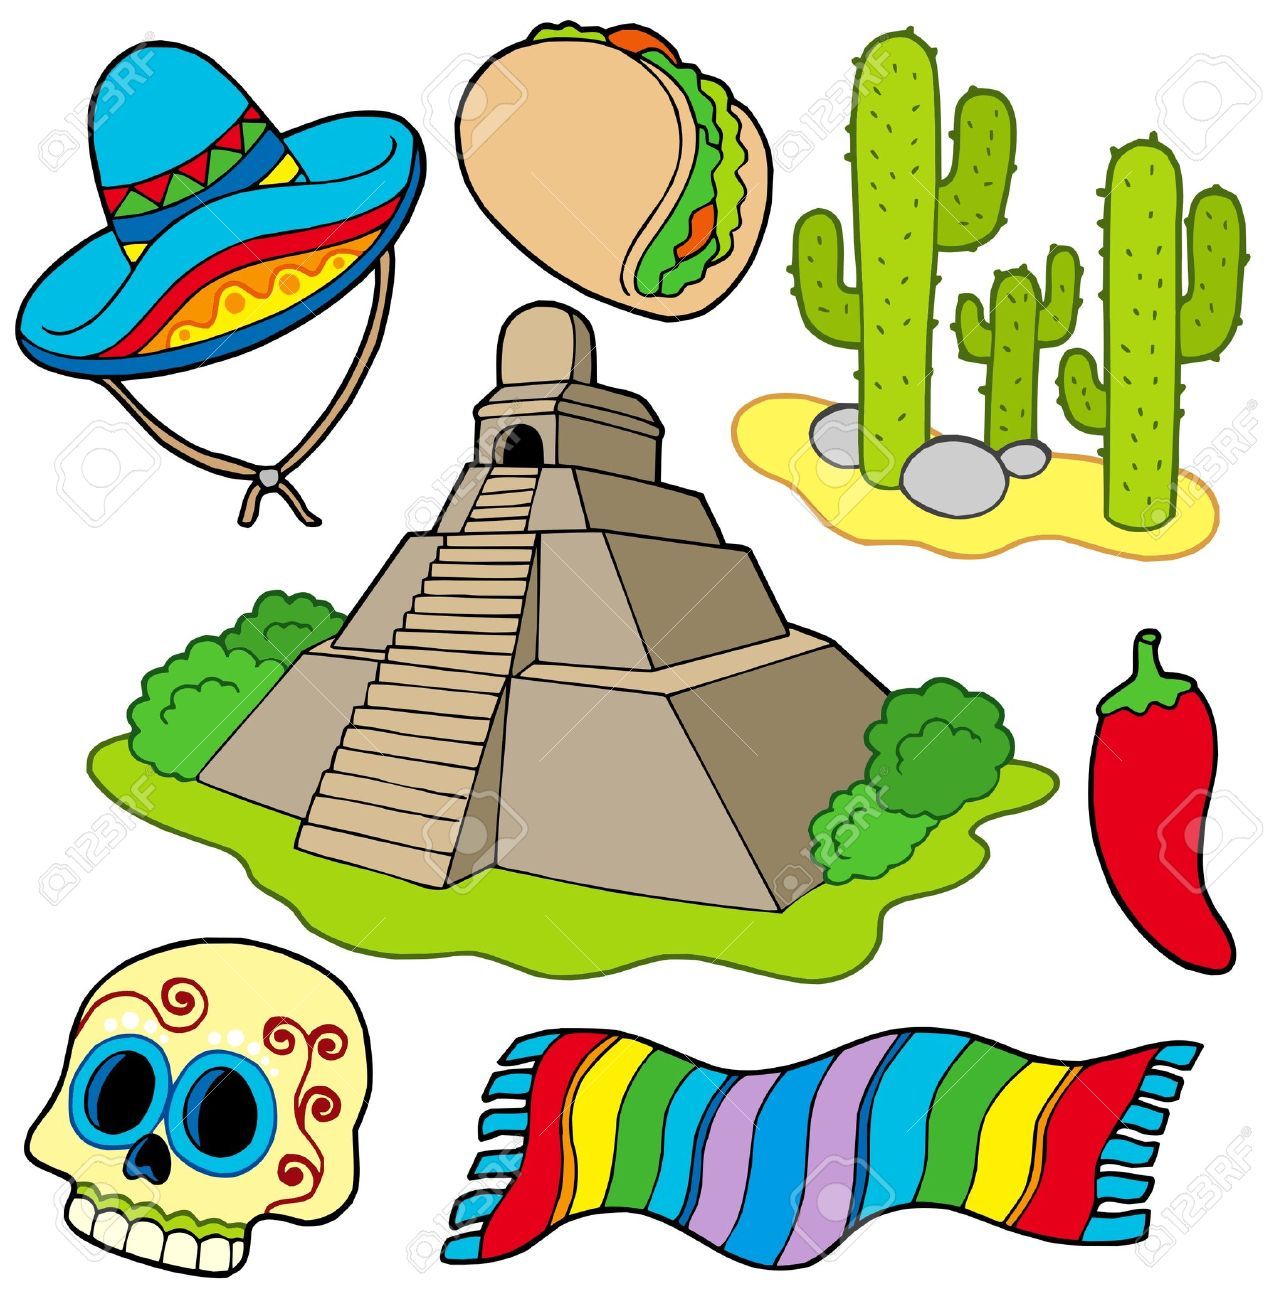 Mexican pinterest mexicans and. Culture clipart